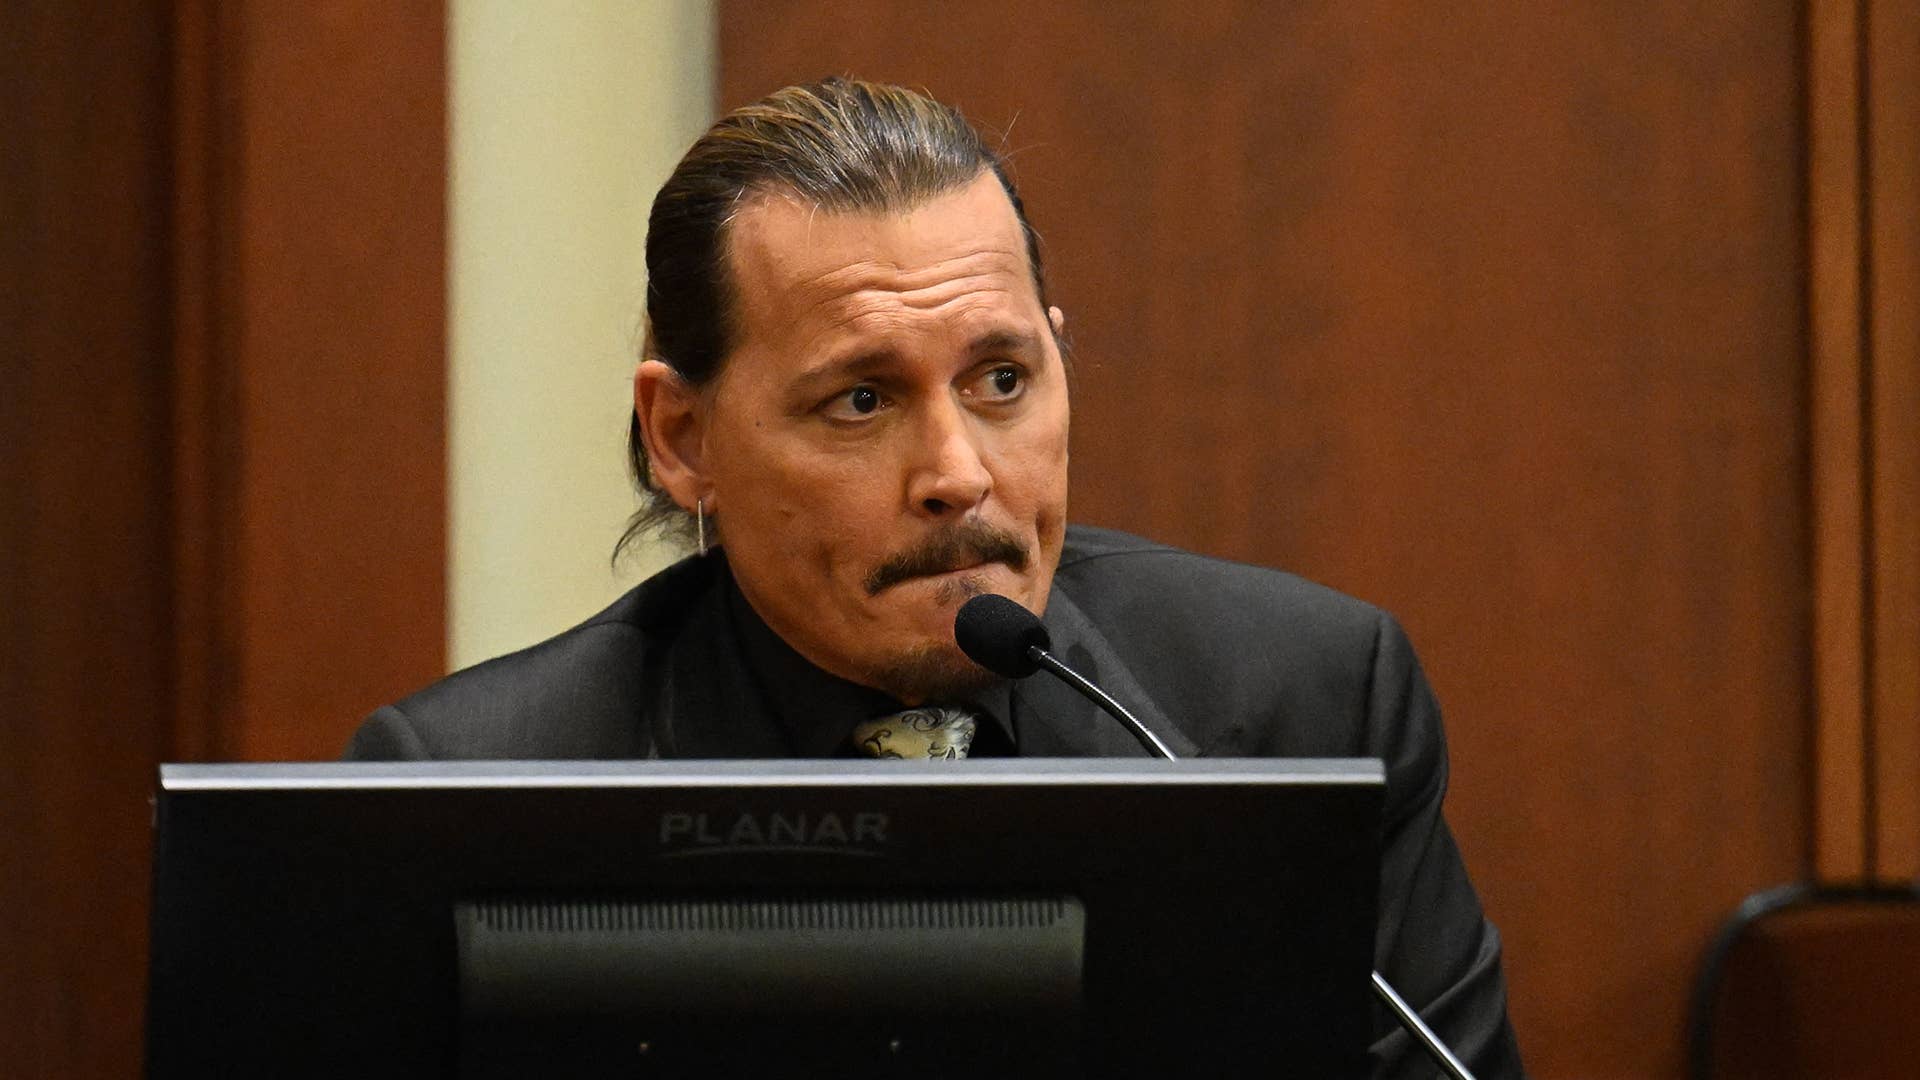 US actor Johnny Depp testifies during his defamation trial in the Fairfax County Circuit Courthouse in Fairfax, Virginia